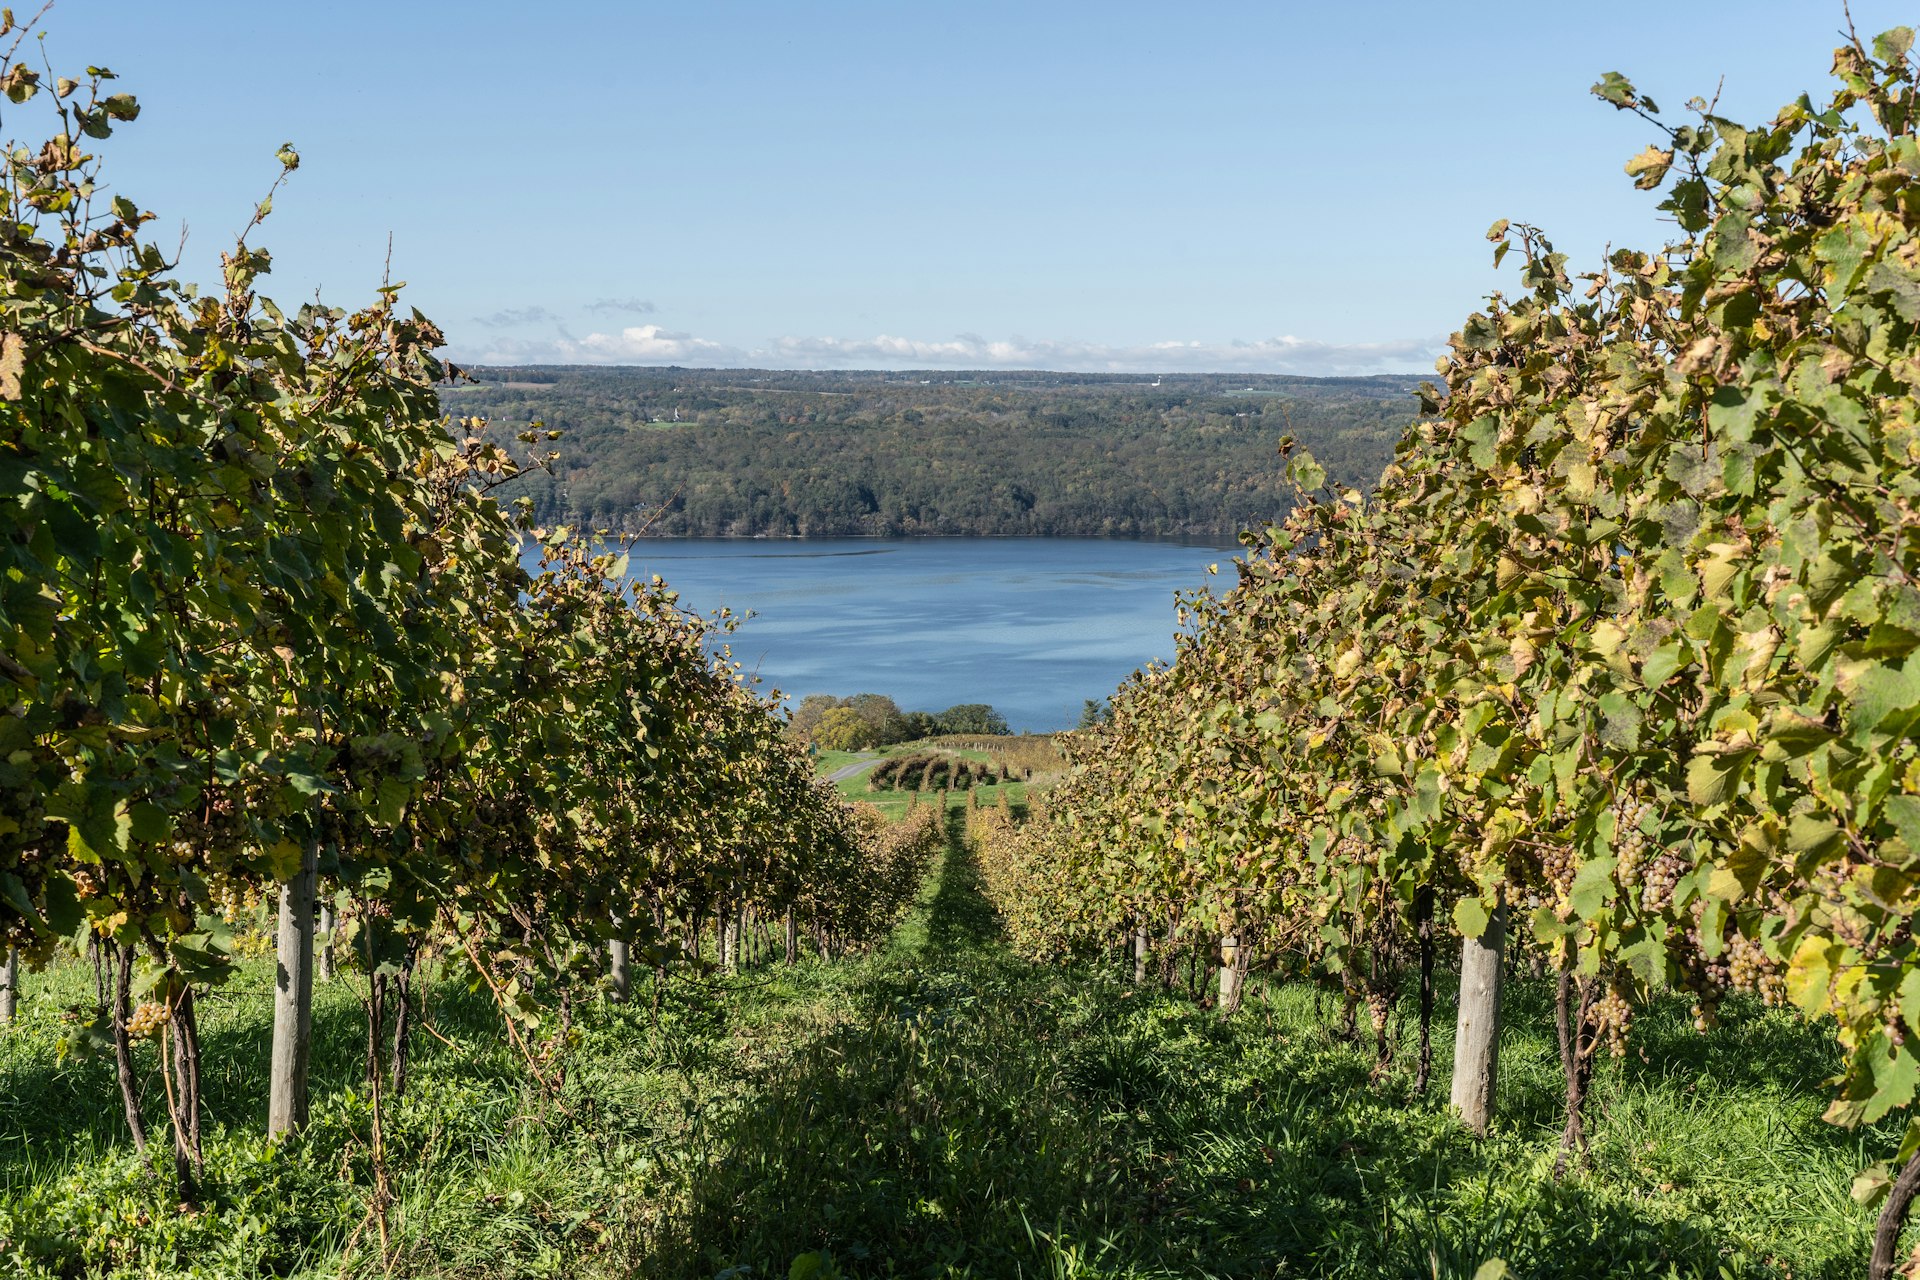 Autumn landscape of Seneca Lake and vineyard in the heart of the Finger Lakes Wine Country, New York